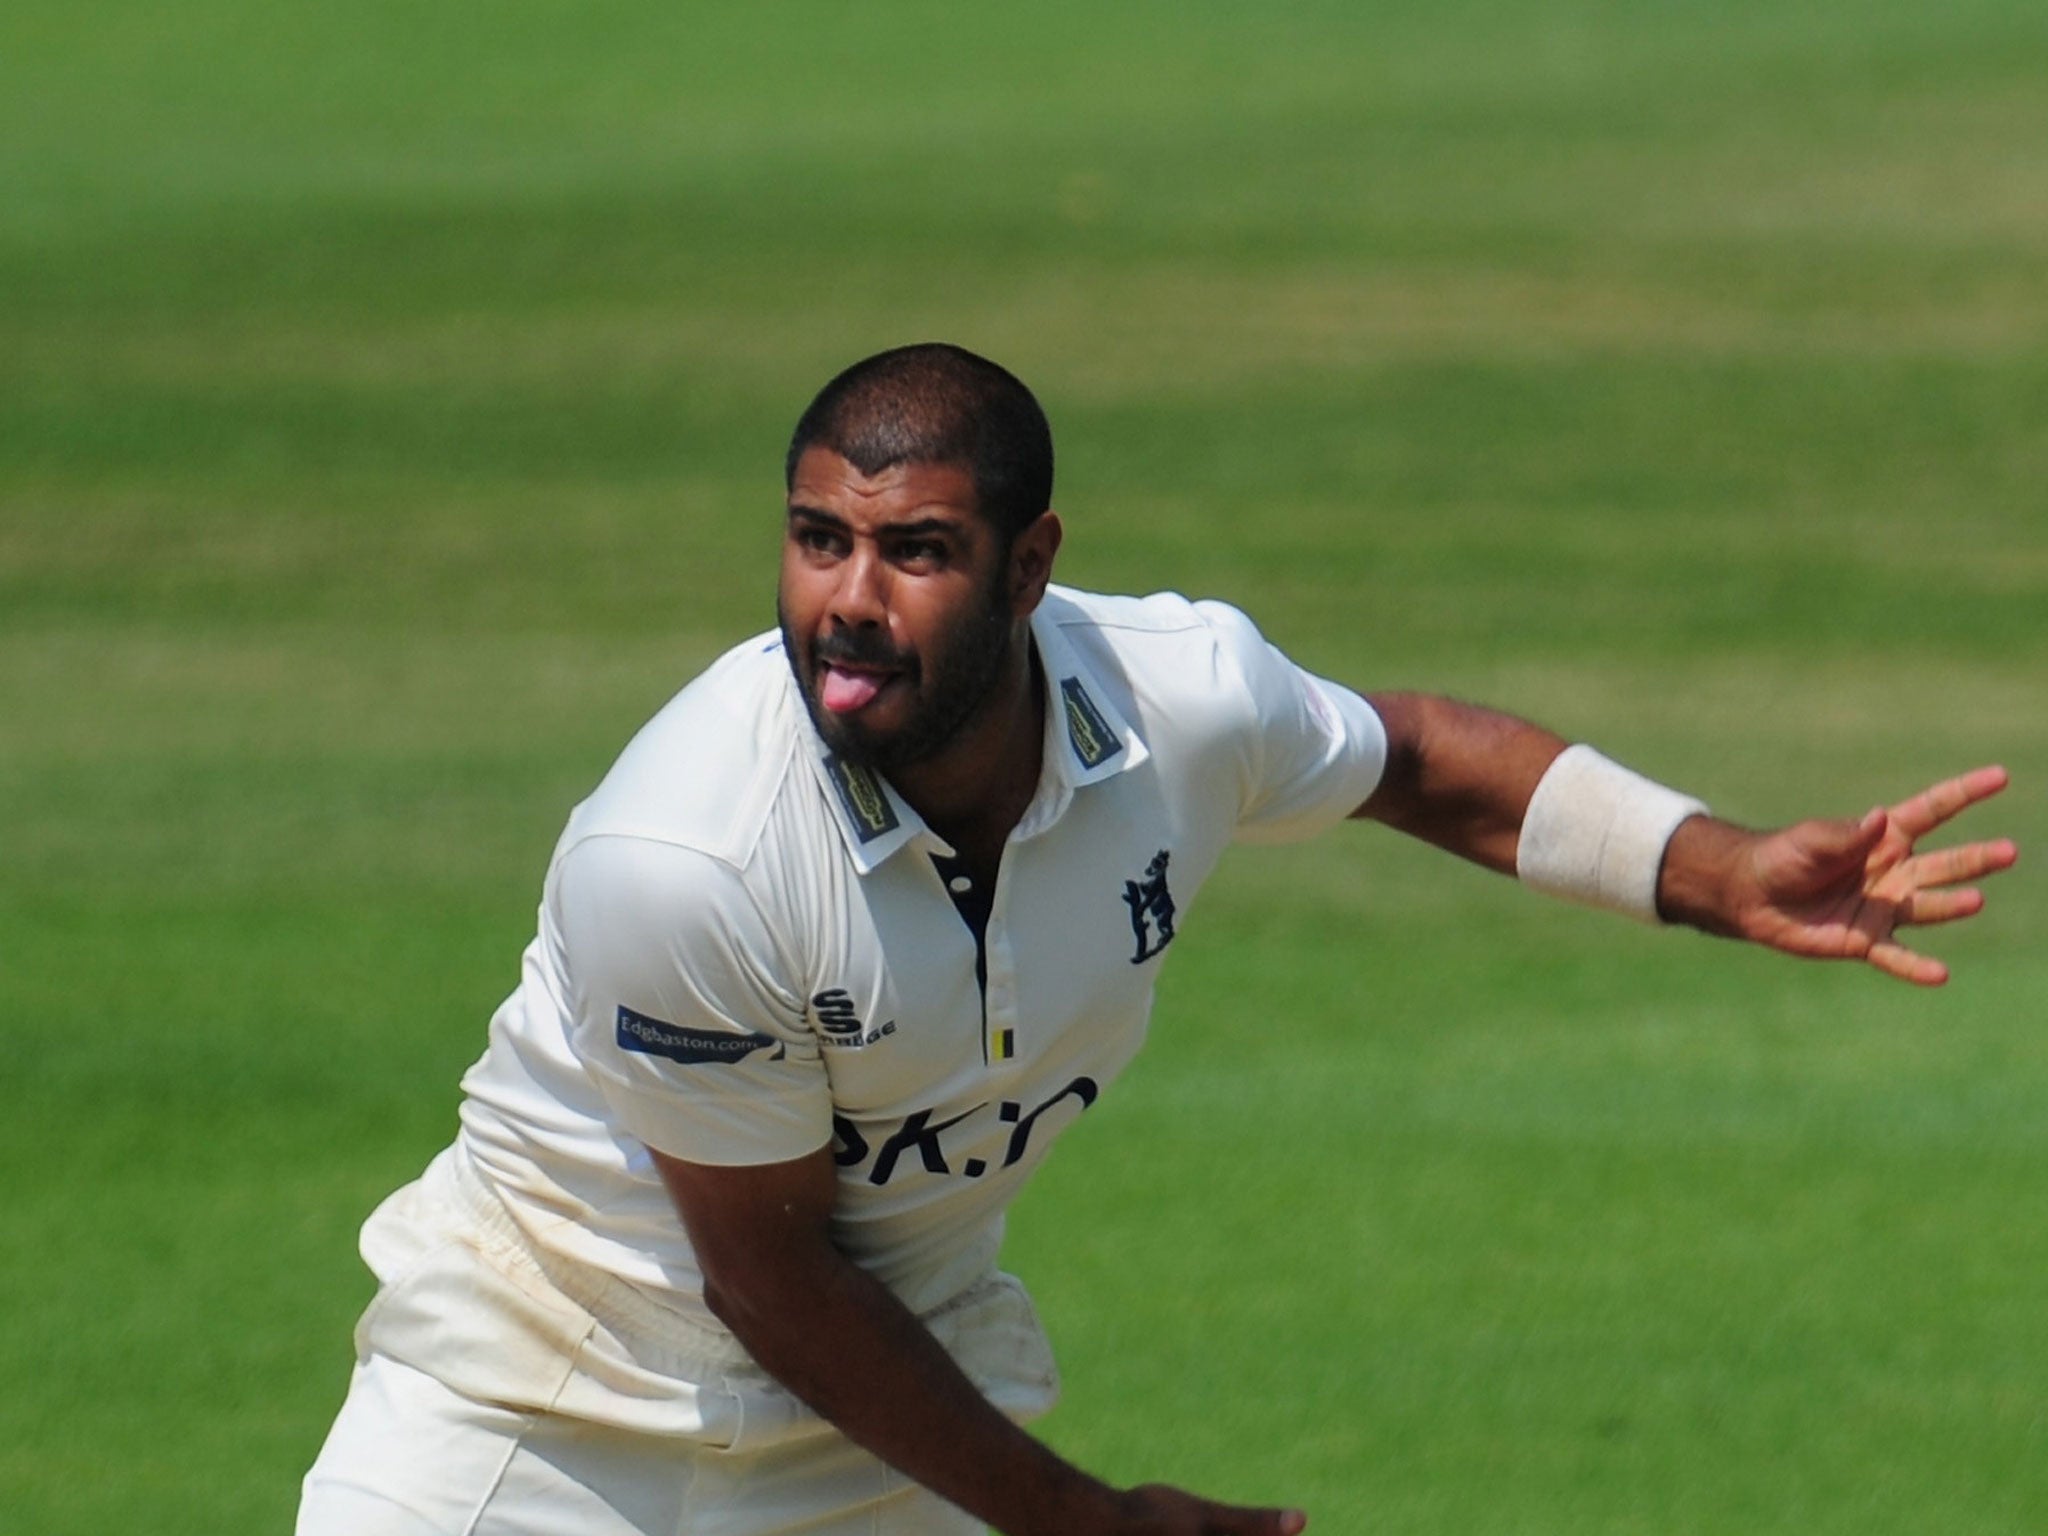 Jeetan Patel proved his worth with bat and ball against Sussex